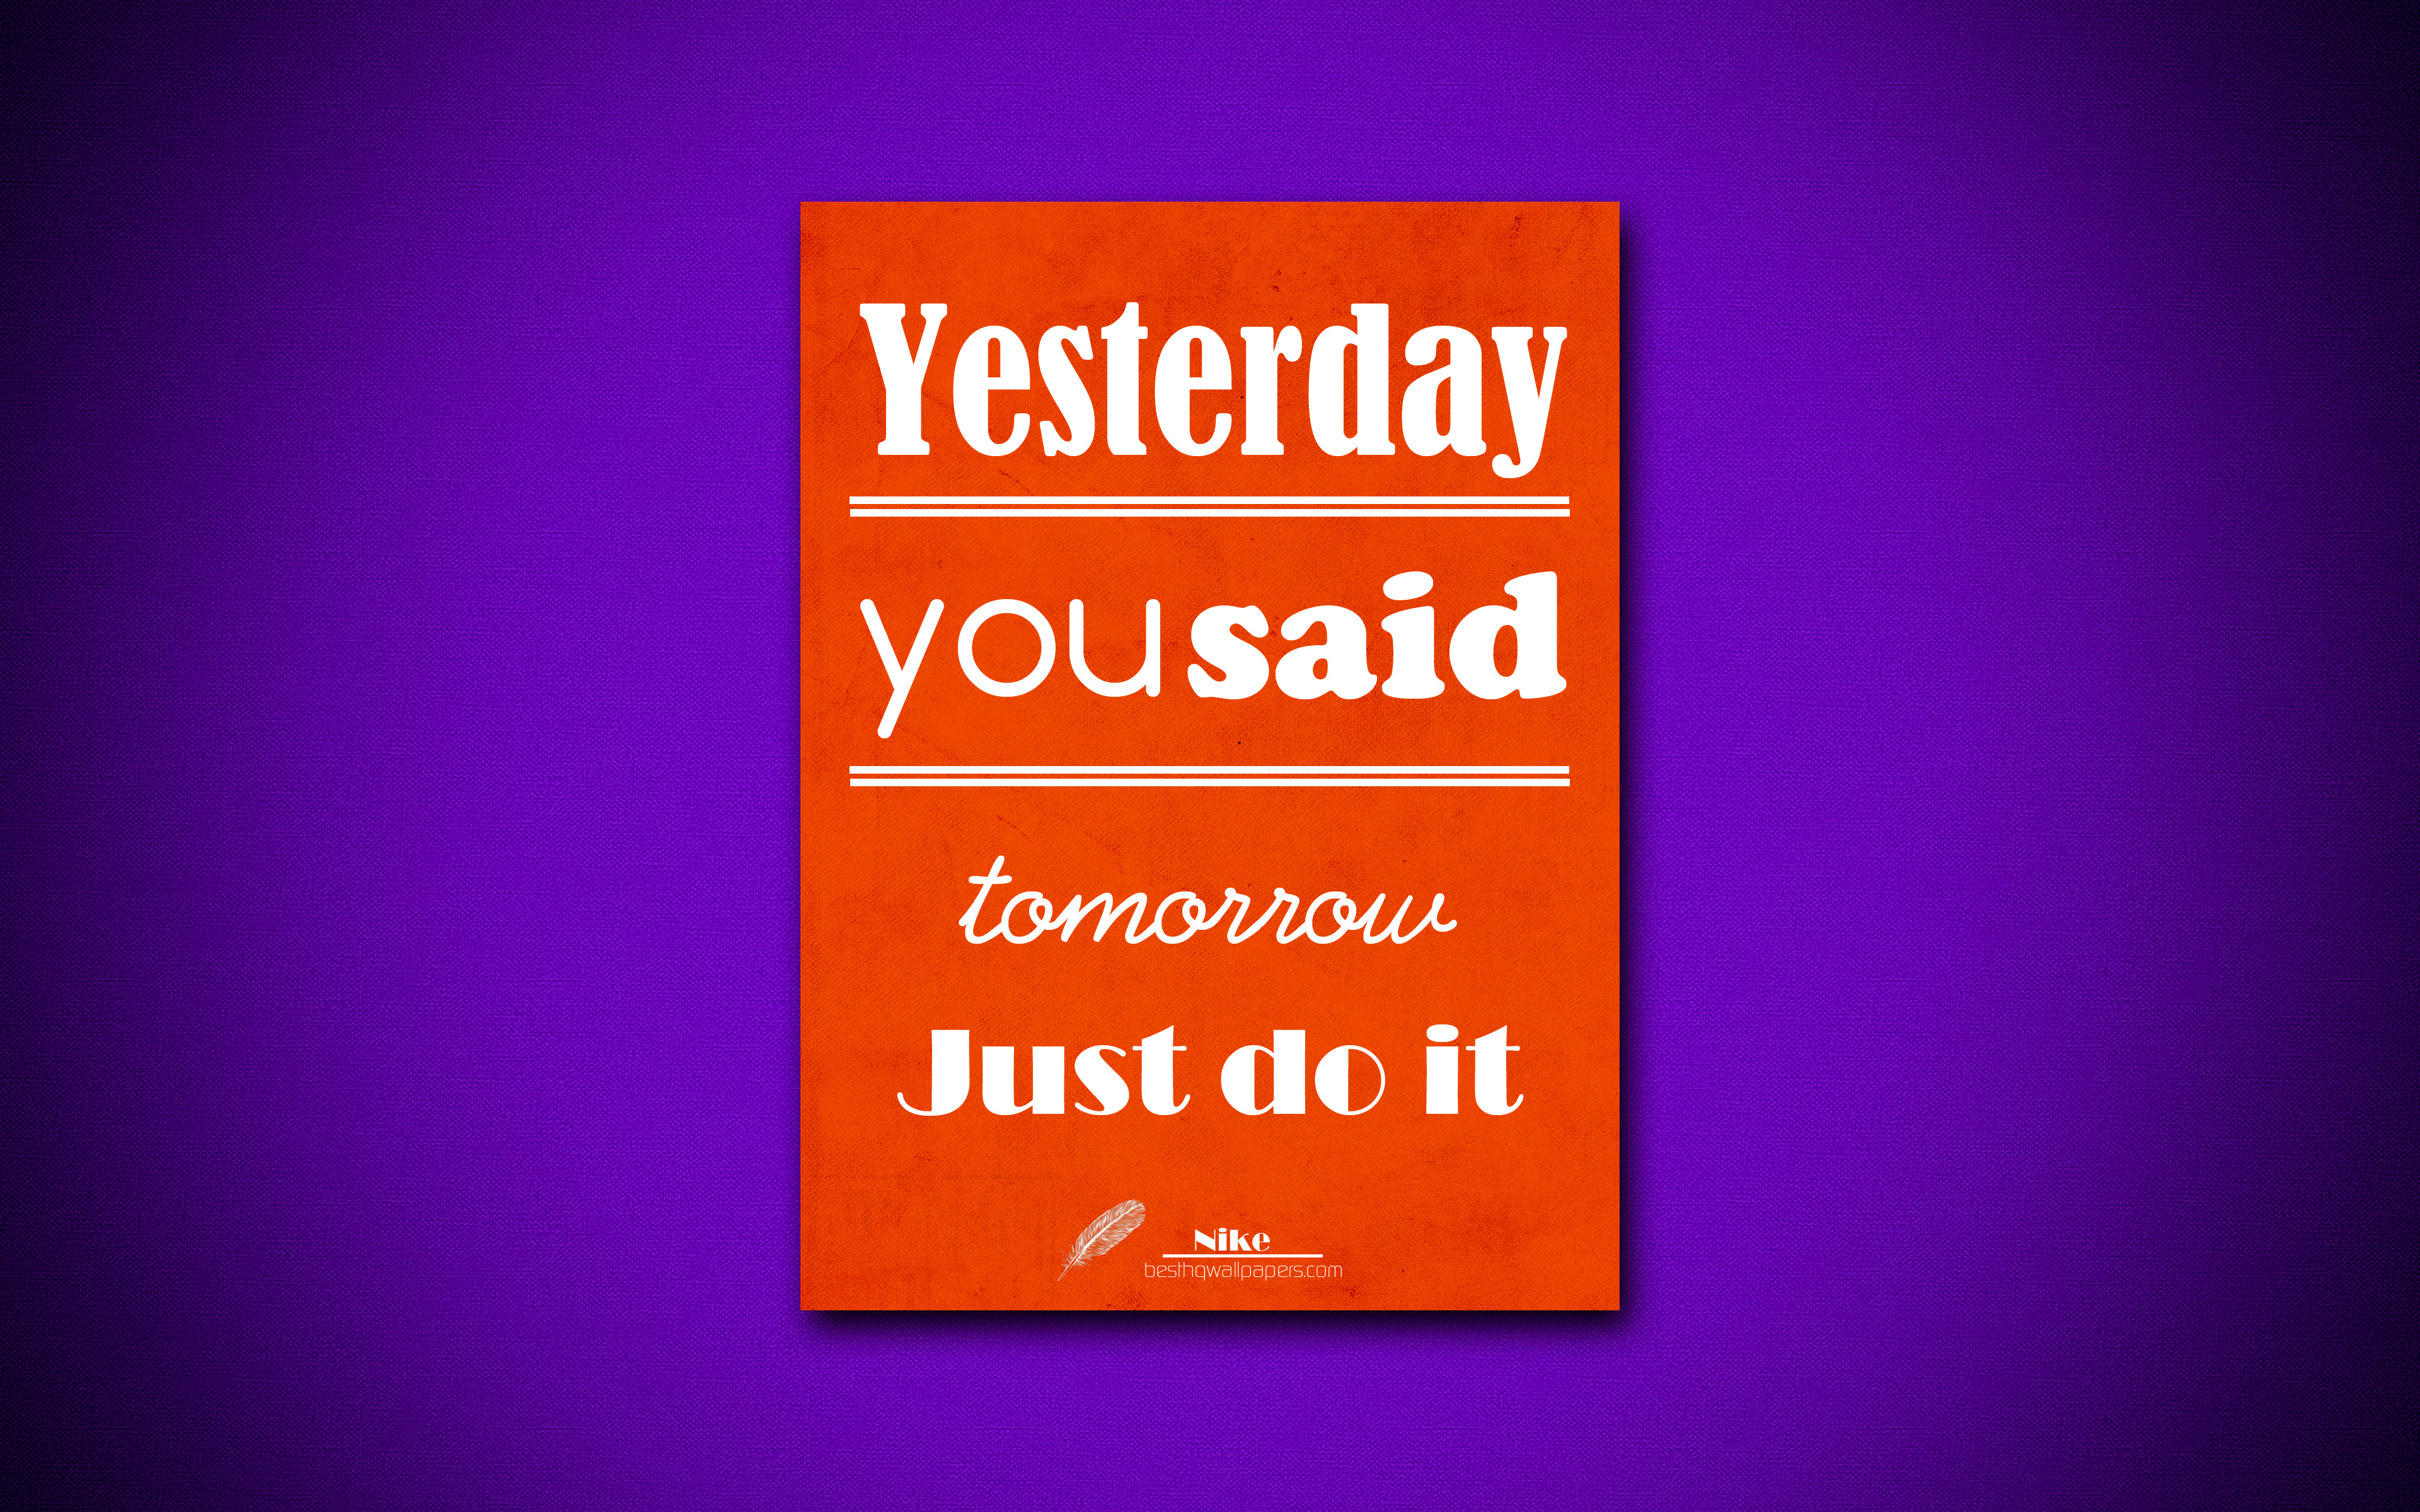 Download wallpaper 4k, Yesterday you said tomorrow Just do it, quotes about life, Nike, orange paper, inspiration, Nike quotes for desktop with resolution 3840x2400. High Quality HD picture wallpaper